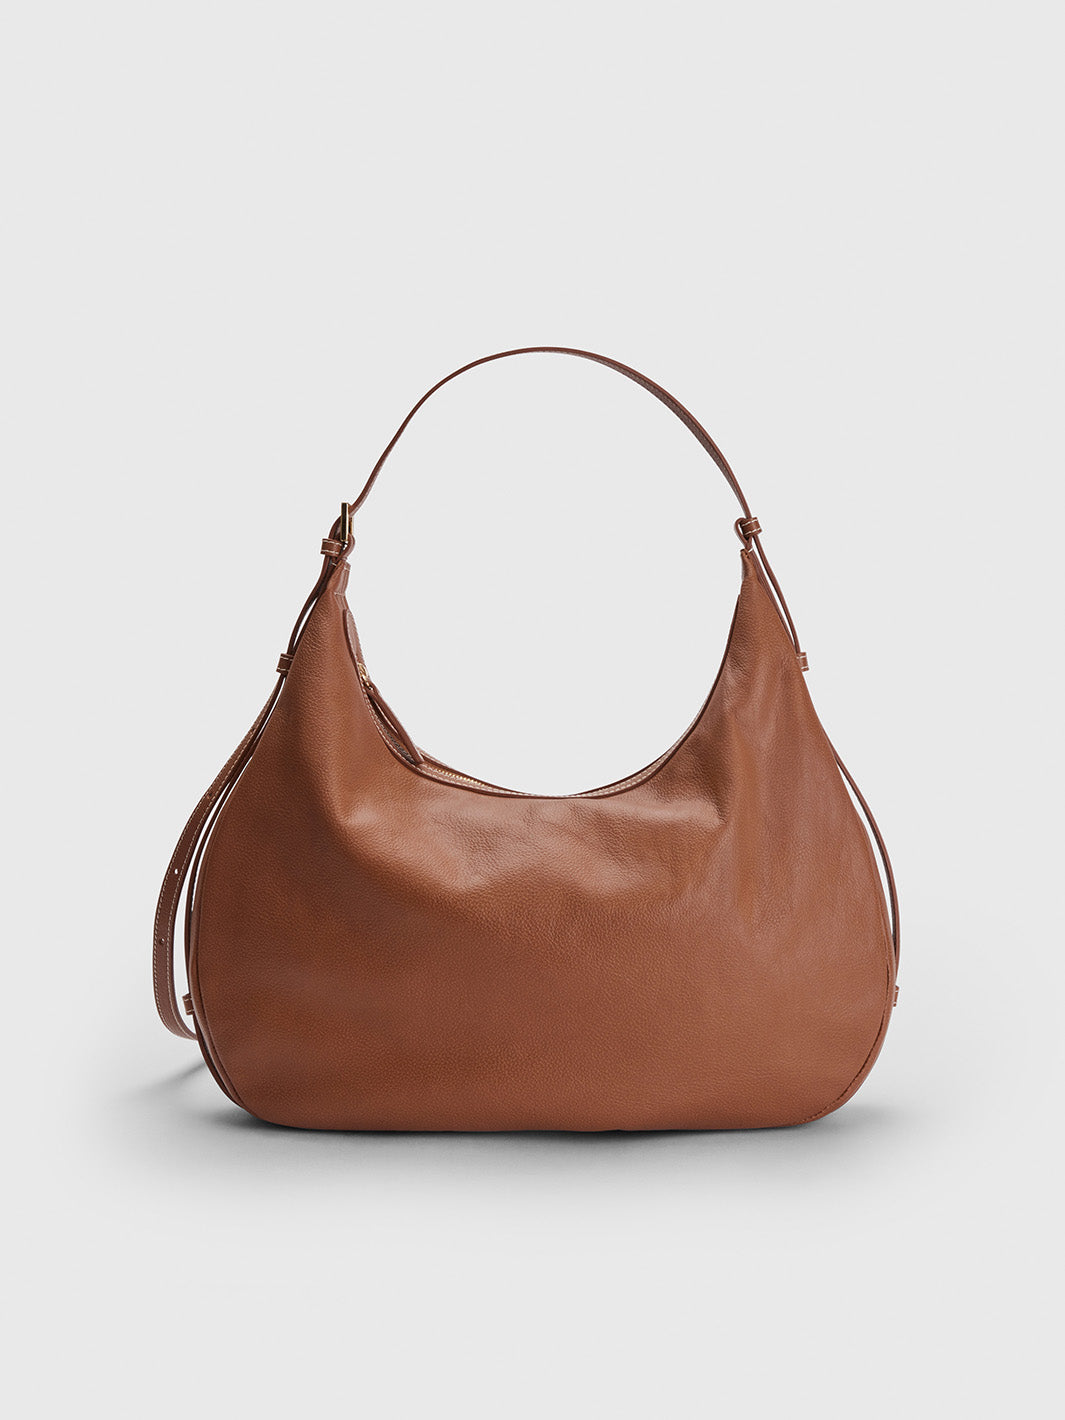 Potenza Brandy/Contrast Stitch Grained leather Large hobo bag